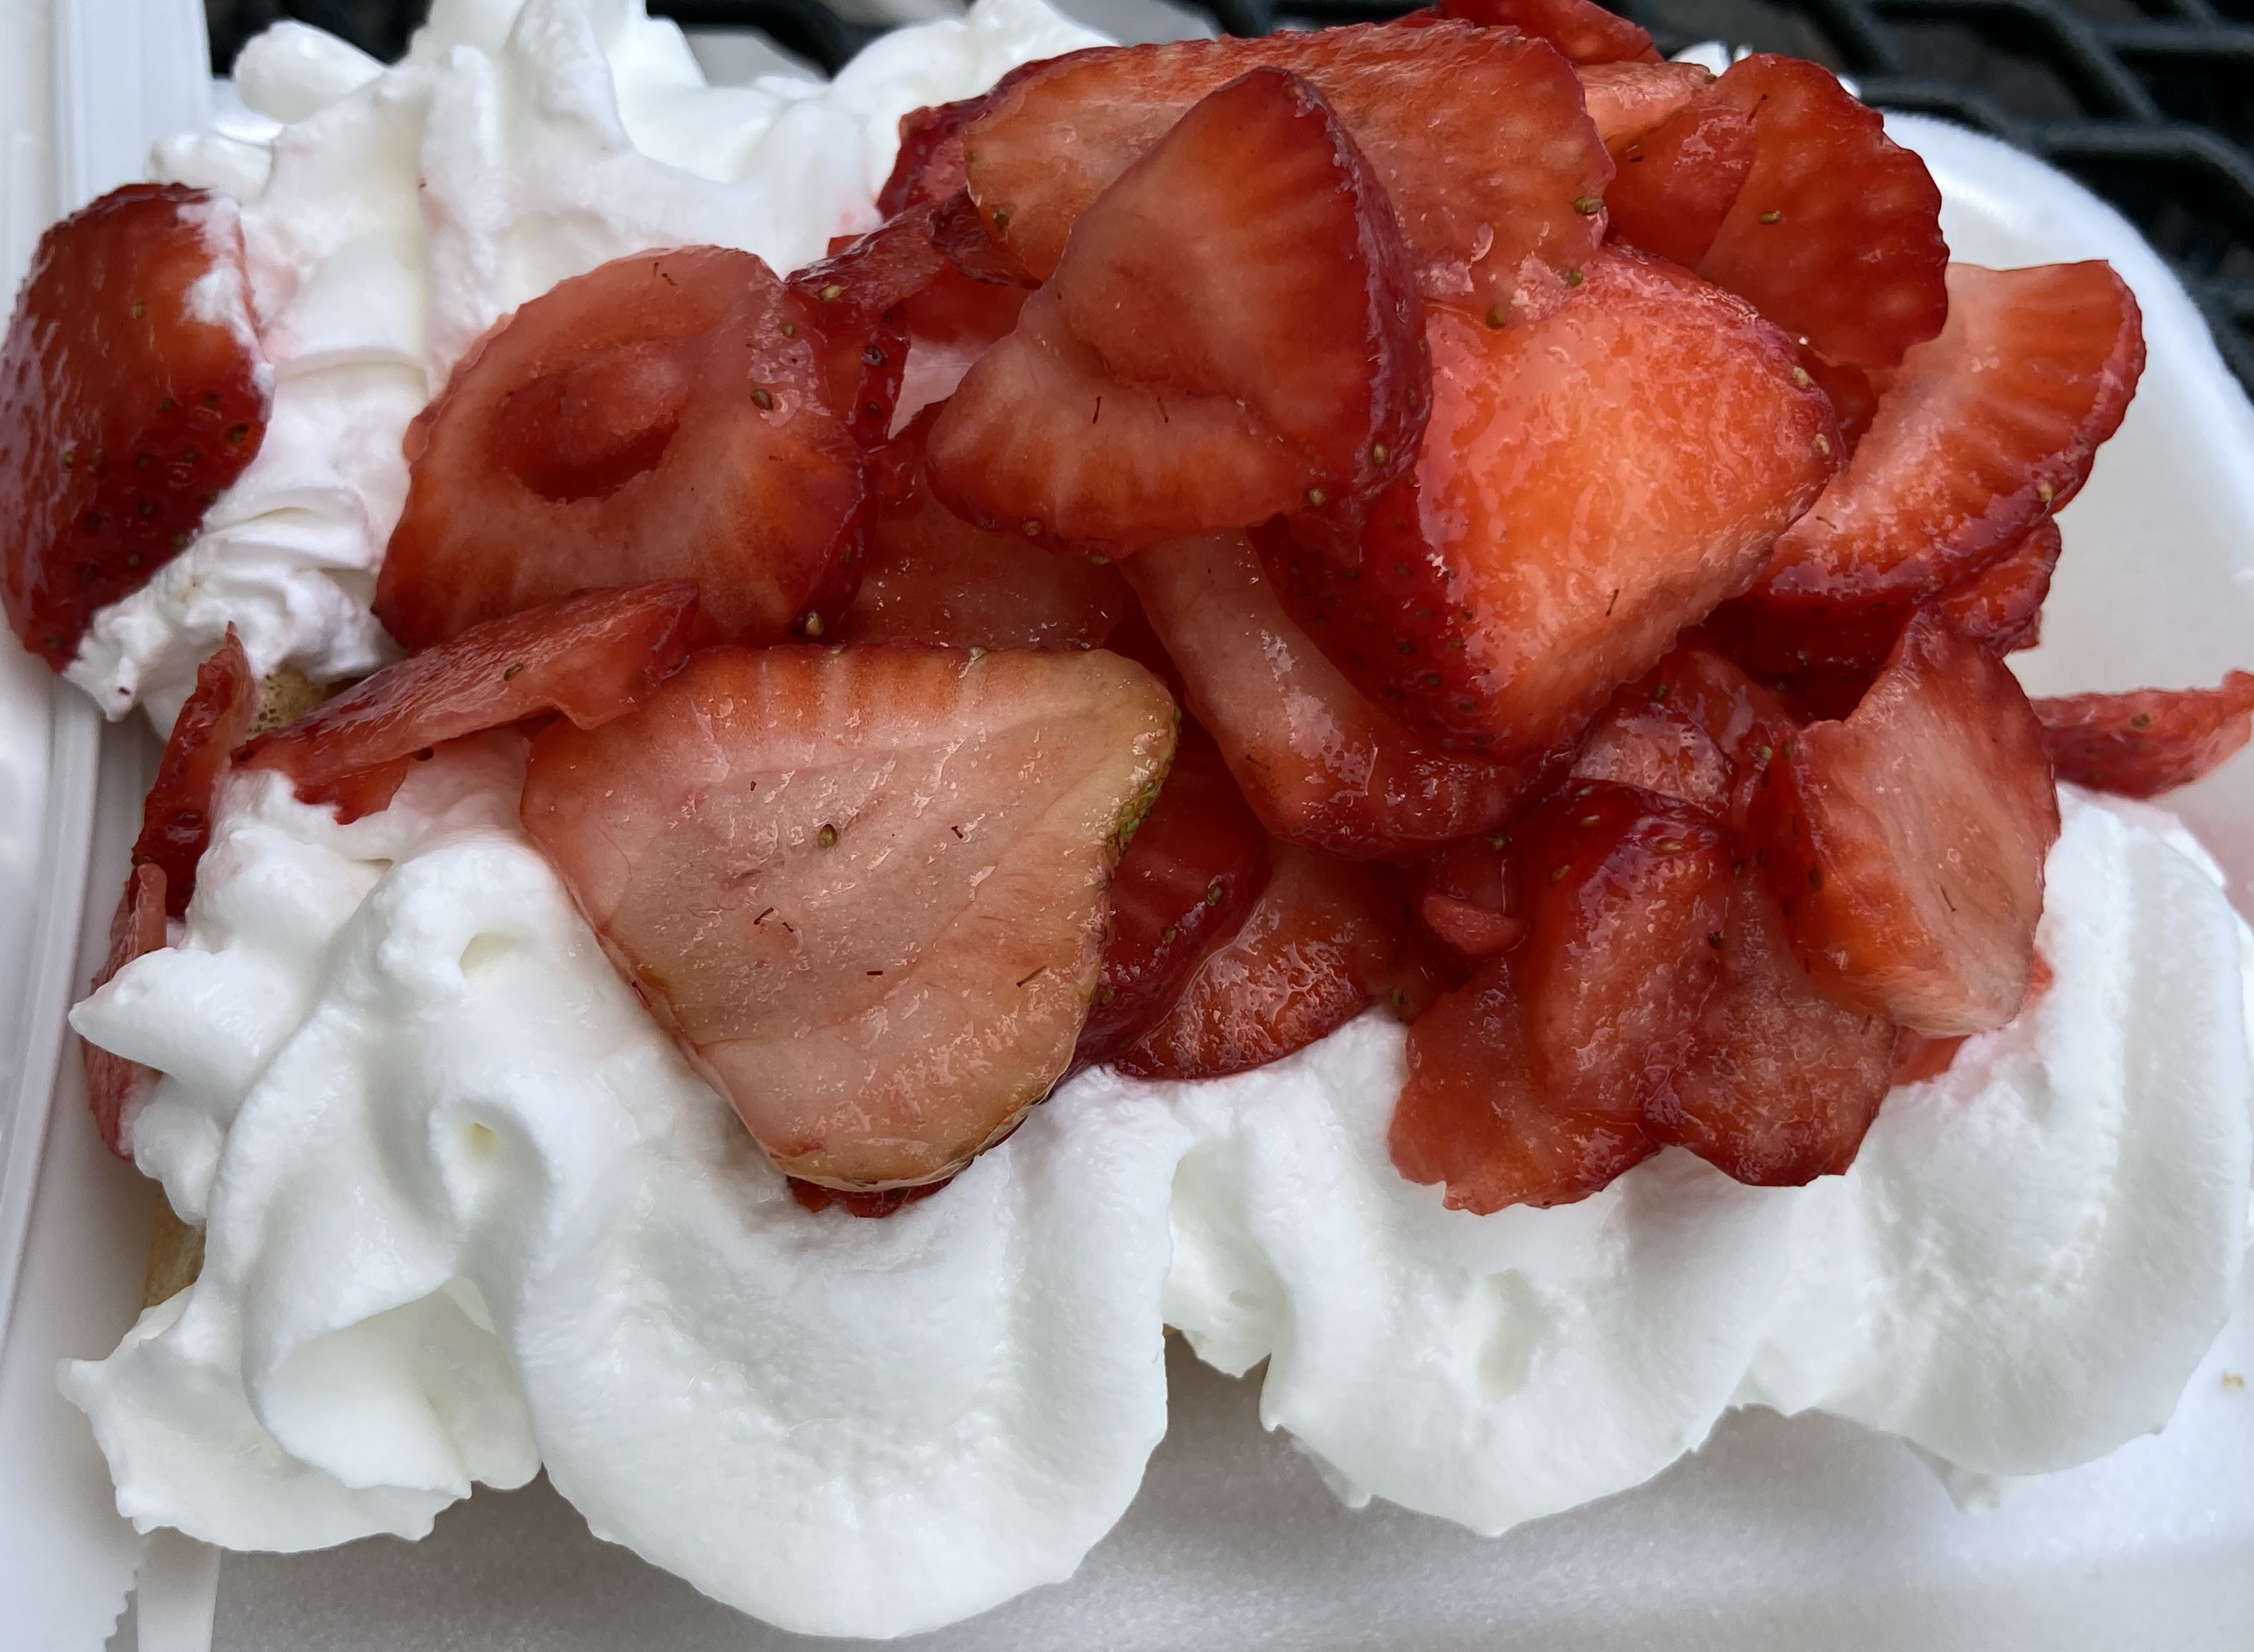 Waffles with whipped cream and strawberries at Maurice's at the New York State Fair.